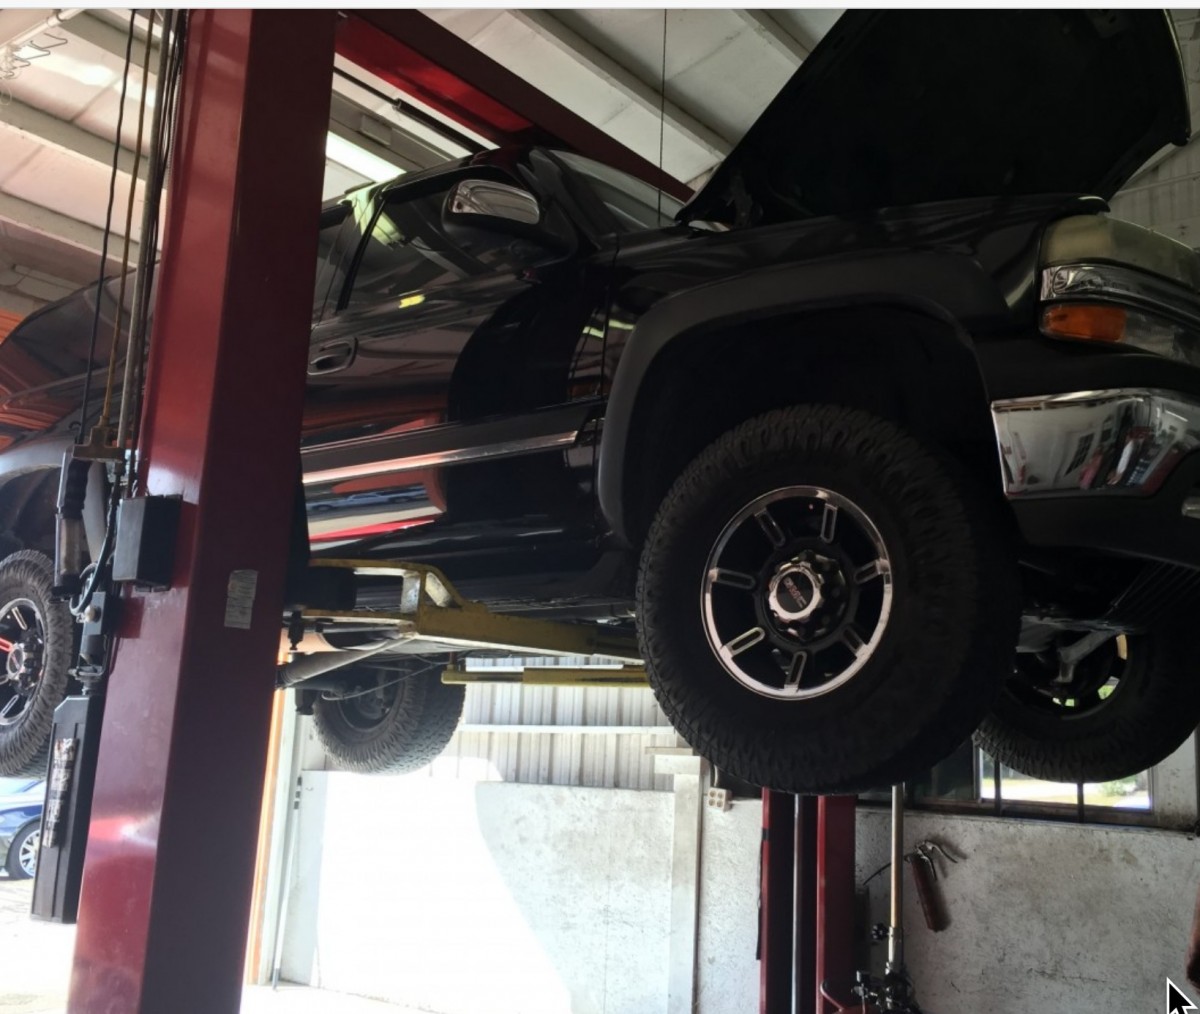 working on a truck on a lift